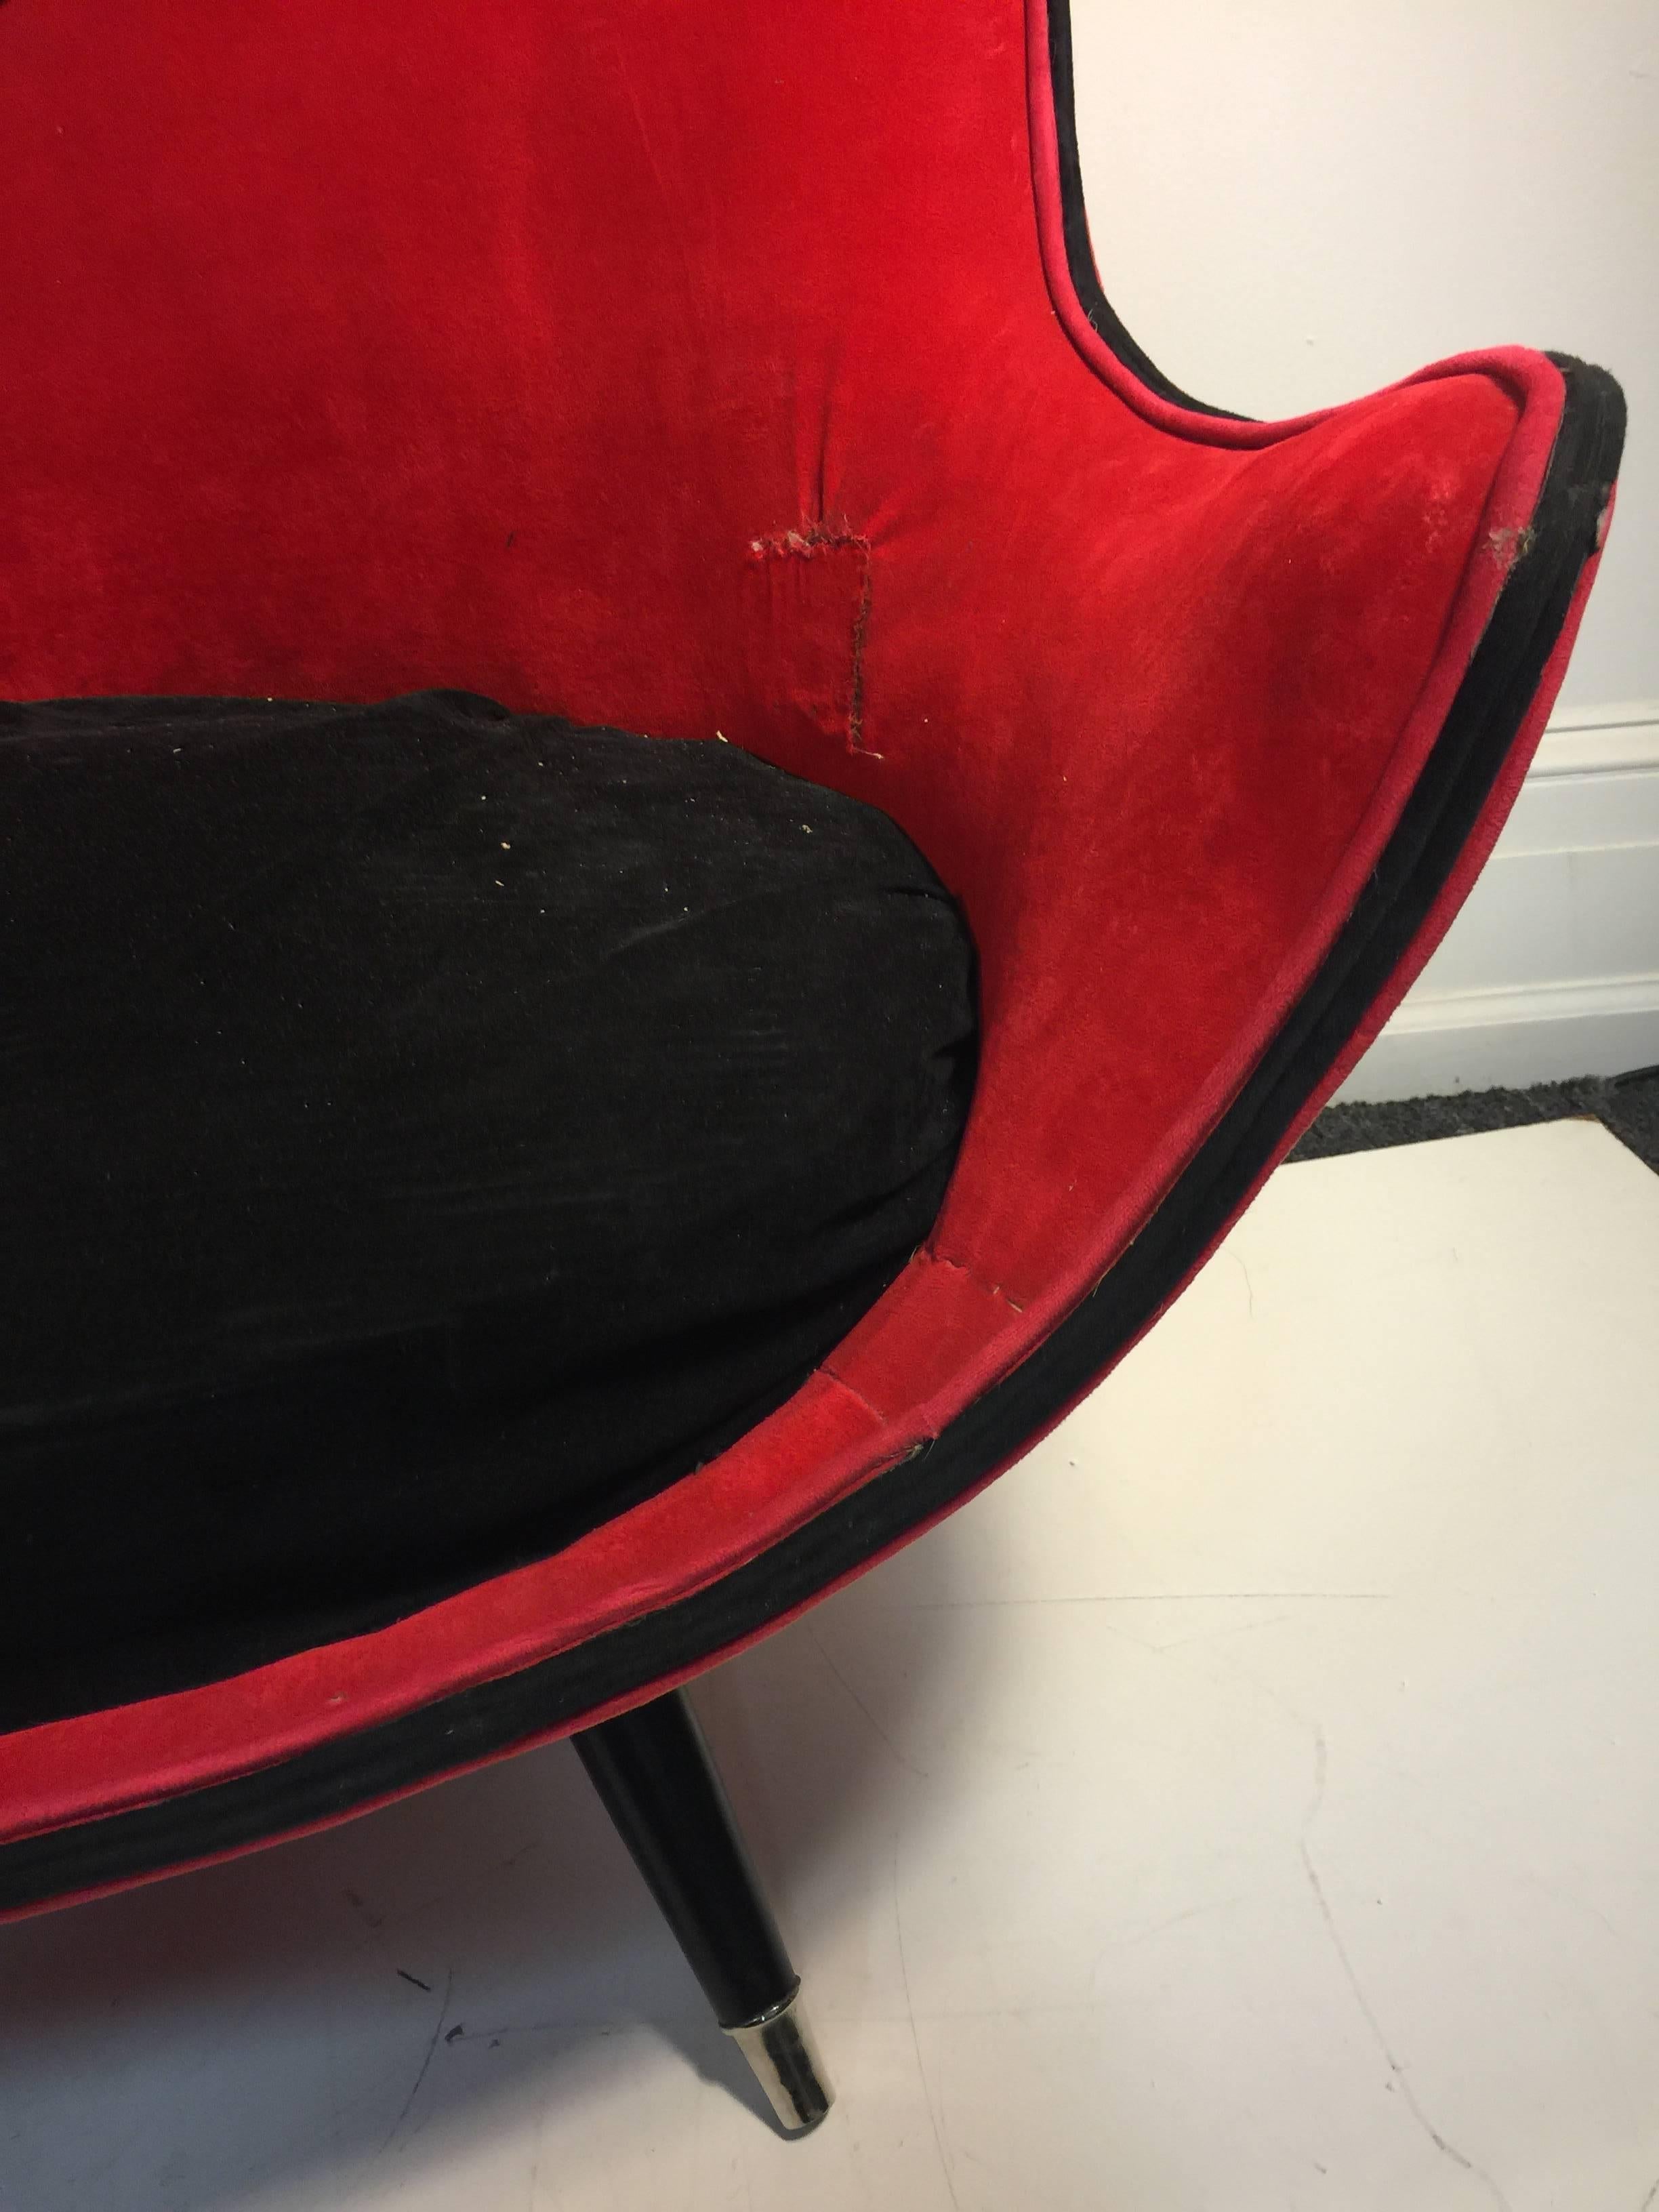 French Exceptional Modernist Red/Black Settee Attributed to Jean Royere For Sale